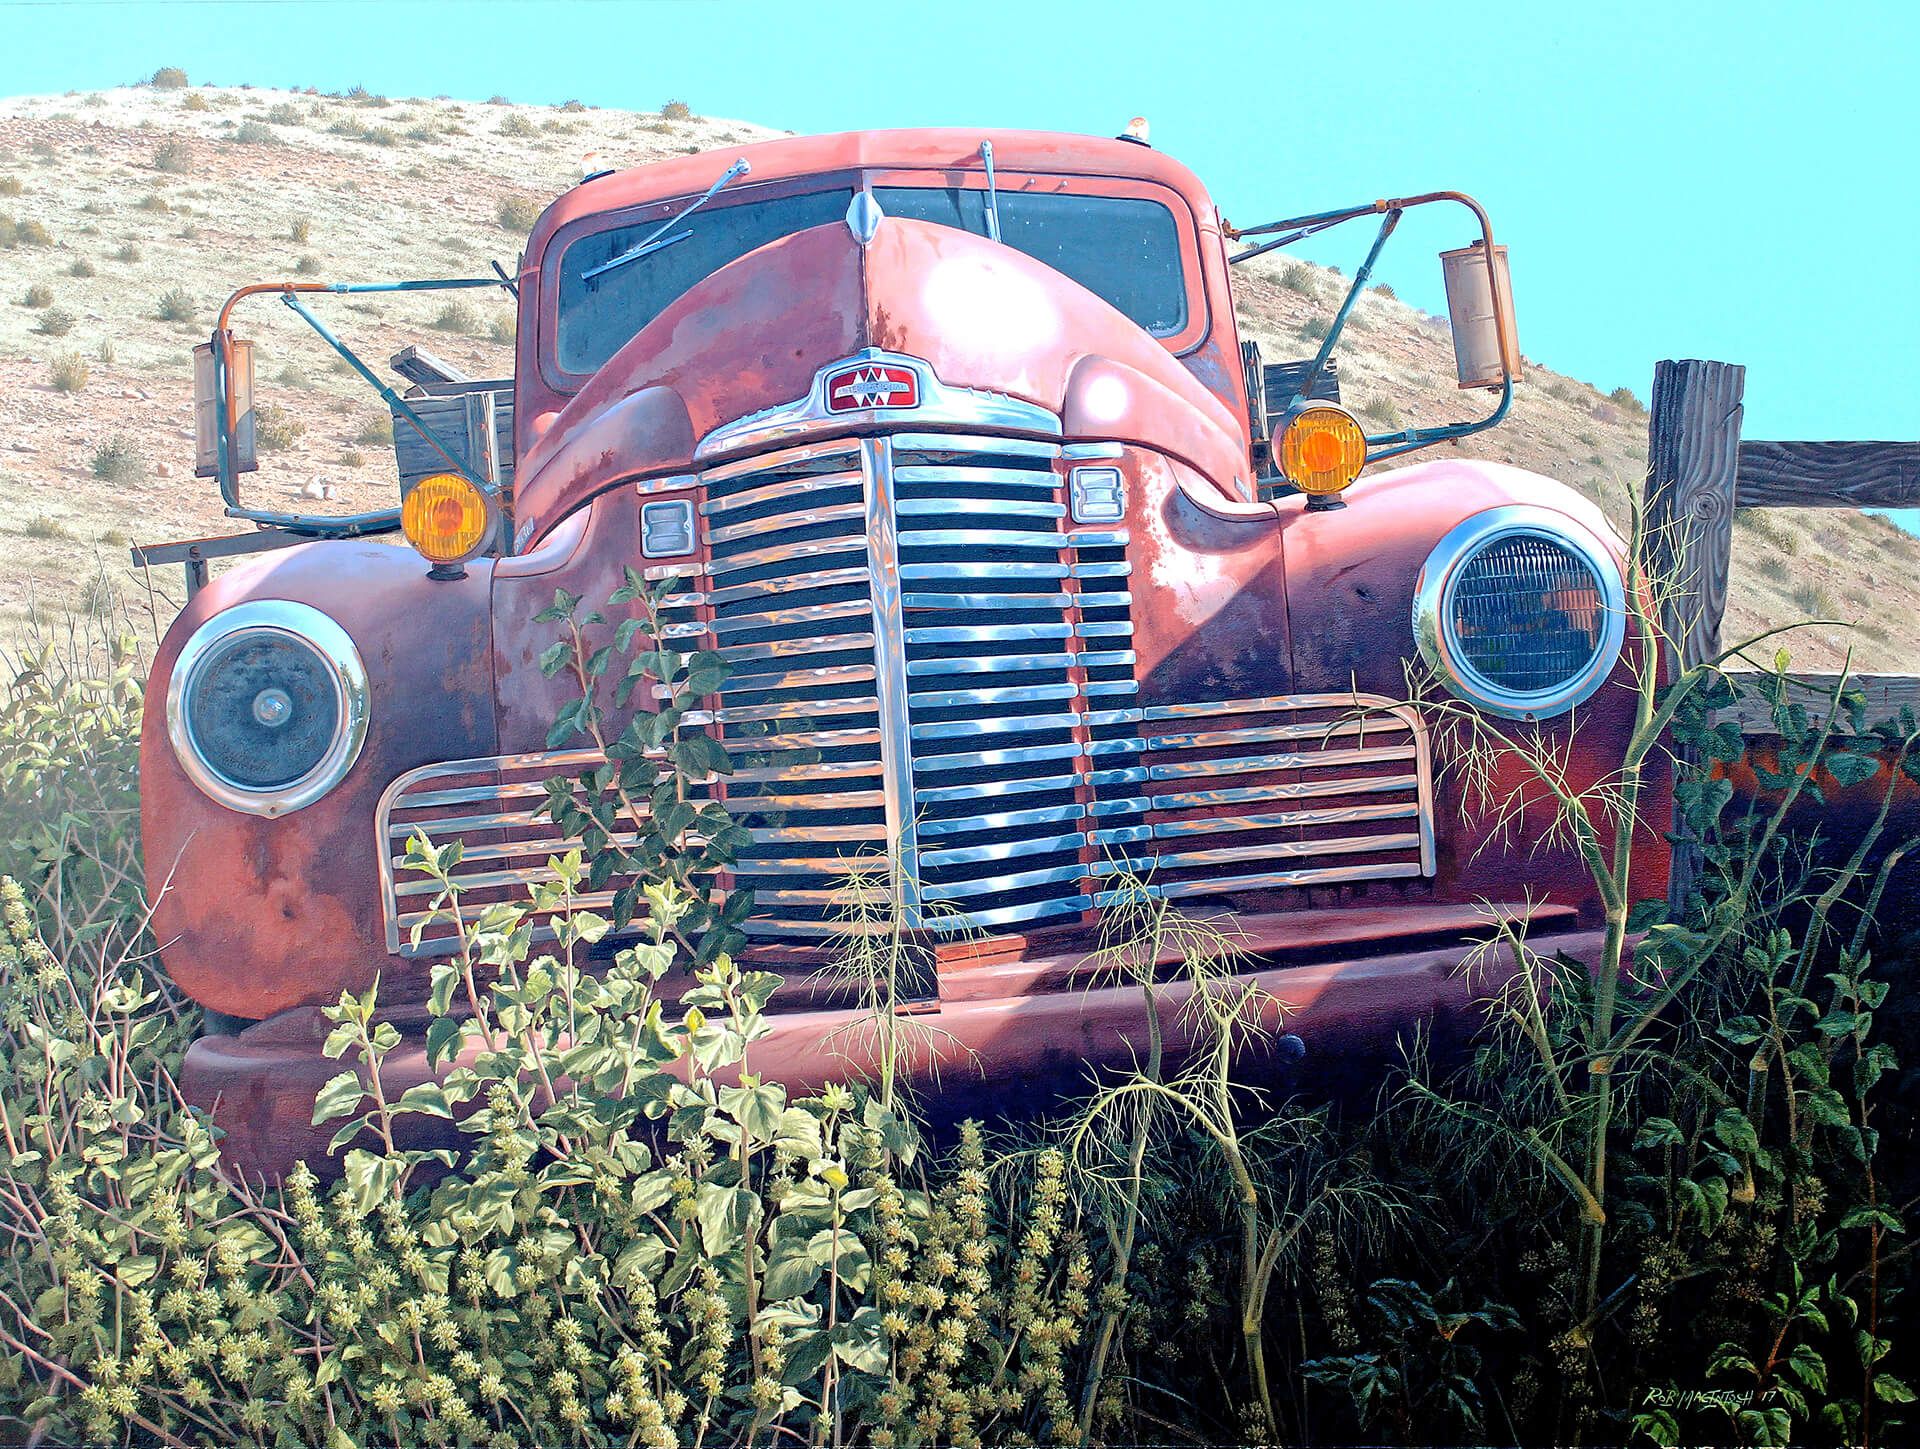 Photorealistic painting of an old truck with broken headlights